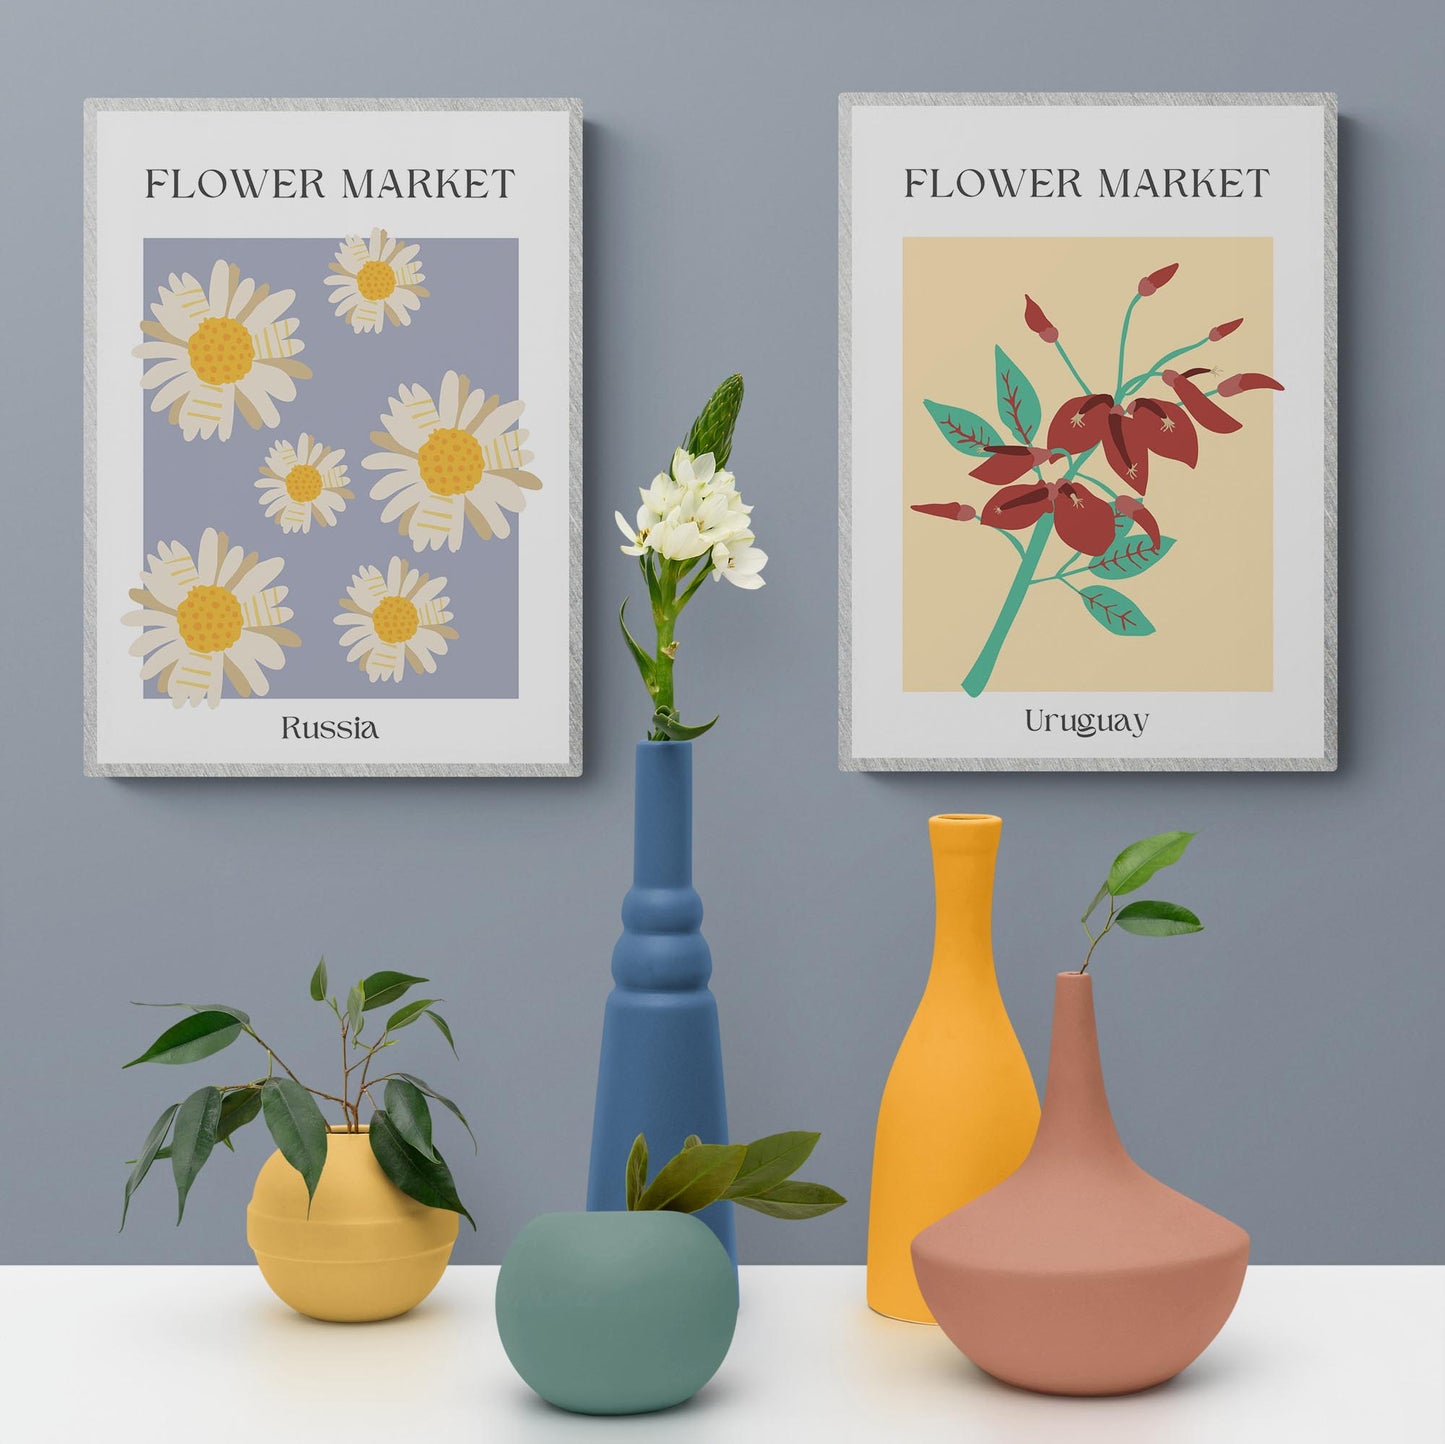  Capture the beauty of flower markets with this Australia Flowers Market Print. This poster features carefully-crafted shapes and colors reminiscent of the art of Matisse. Perfect for gallery walls and colorful room decor, this vibrant design adds a finishing touch to any home. Discover the history of flower markets in this beautiful wall art print.